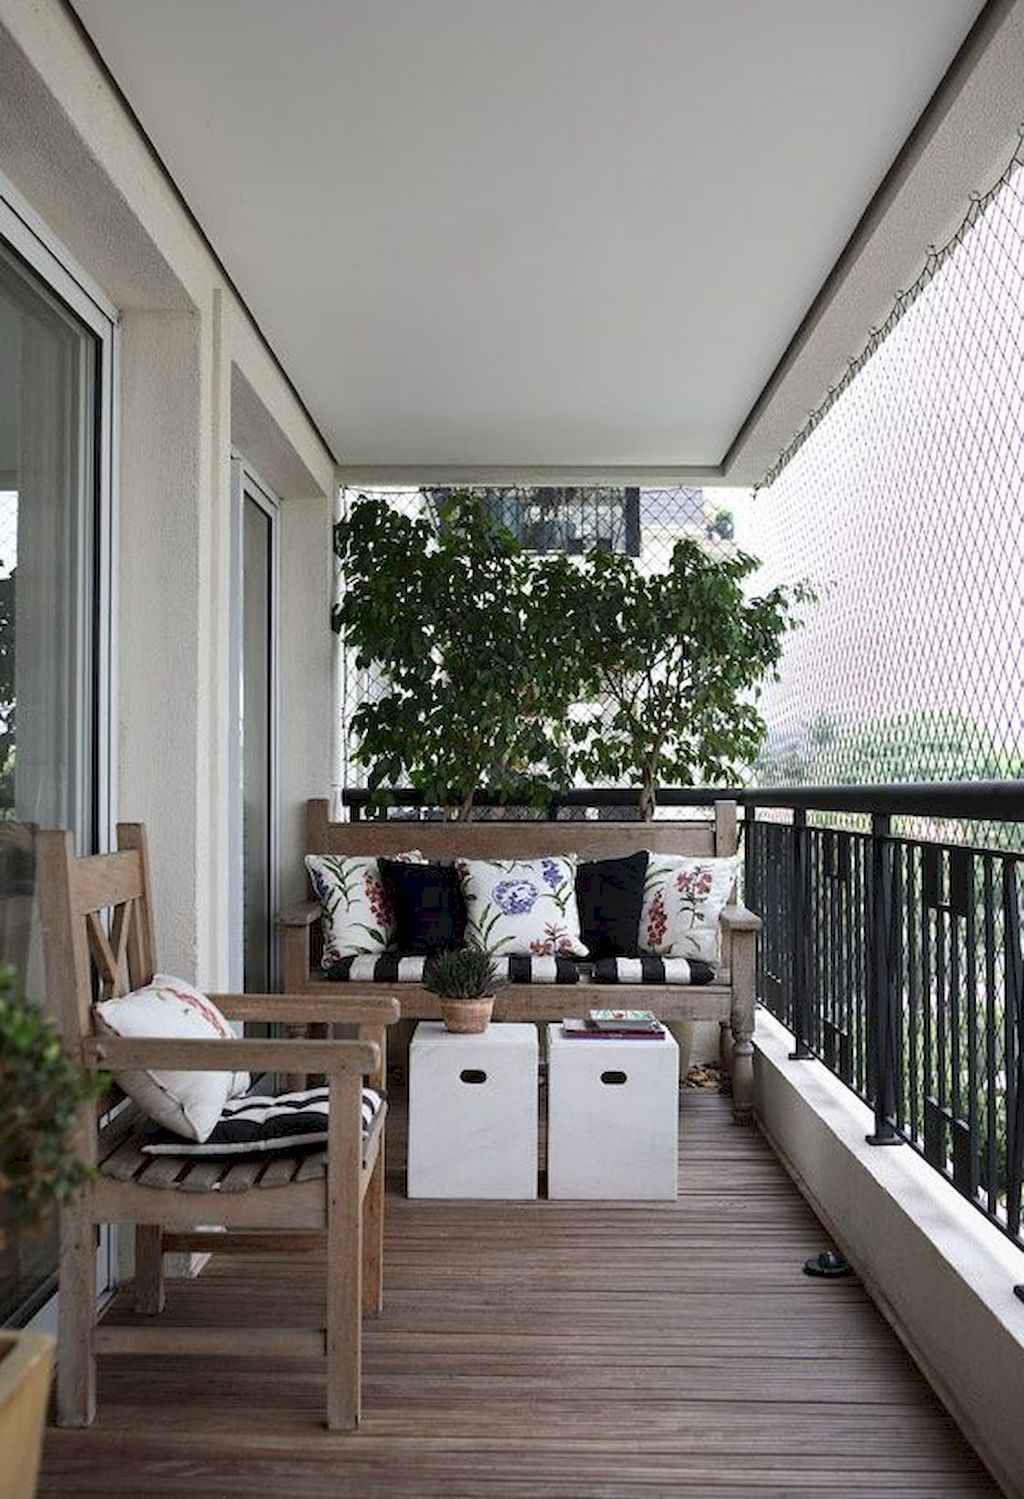 75 Cozy Apartment Balcony Decorating Ideas – Structhome | Small With Coffee Tables For Balconies (Gallery 4 of 20)